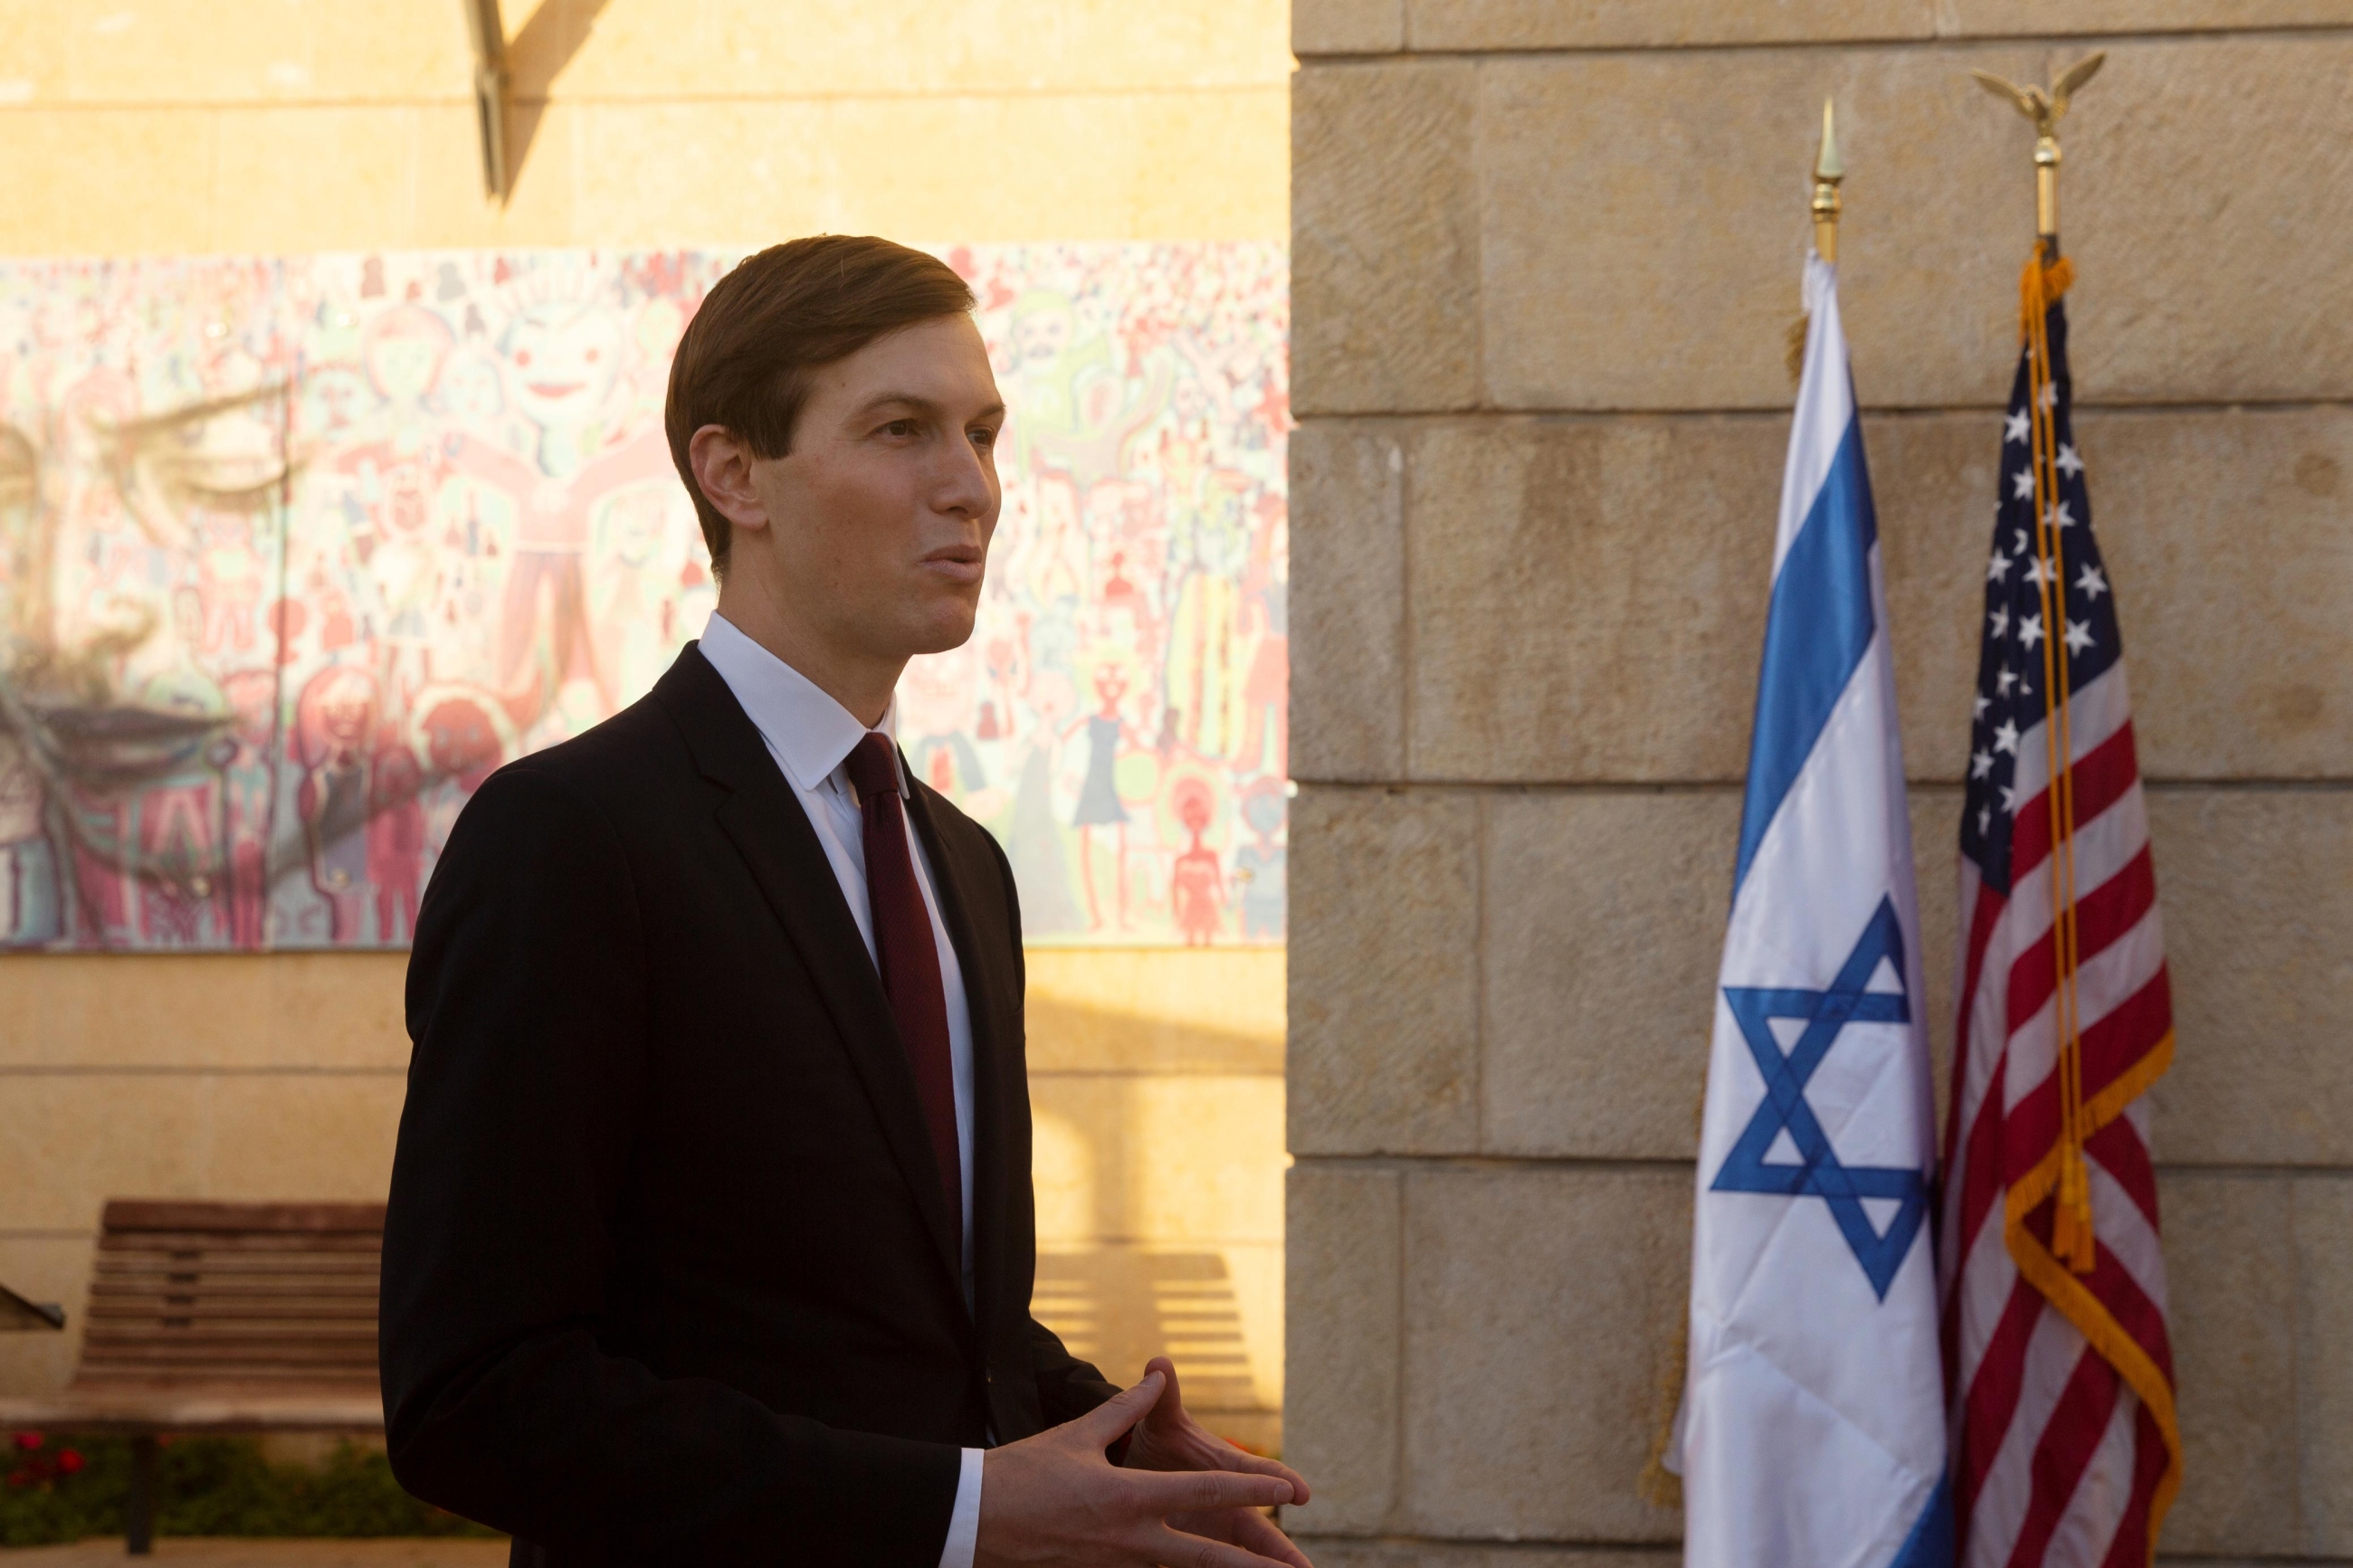 Kushner said the normalisation of ties between Morocco and Israel will bring new opportunities for the two countries.